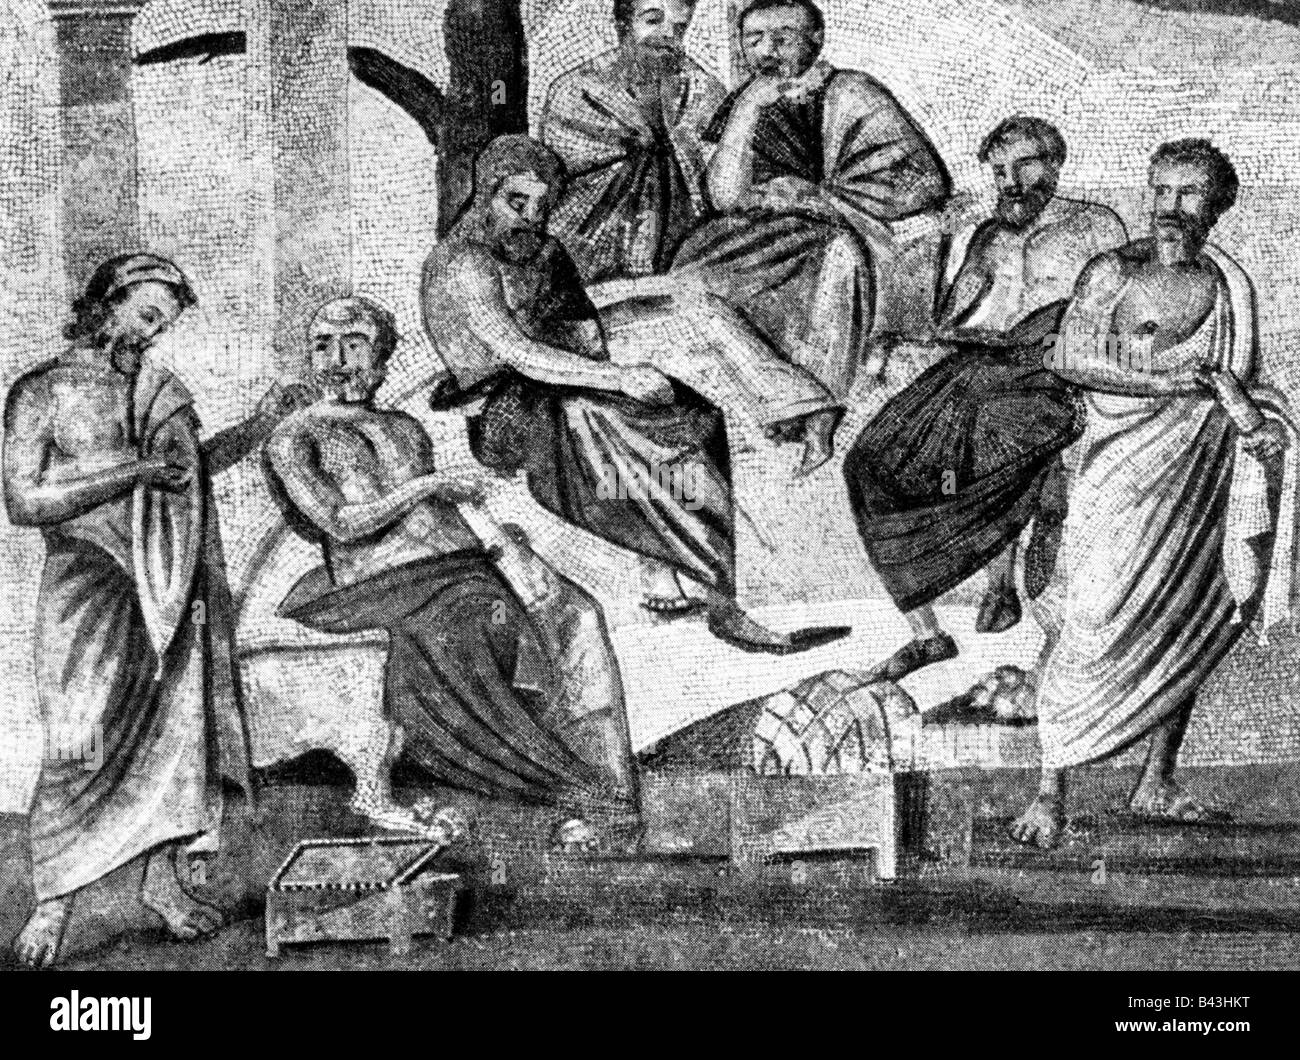 Plato, 427 - 347 BC, Greek philosopher, with his students, after ancient mosaic from Pompeii, national museum Naples, Italy, Stock Photo